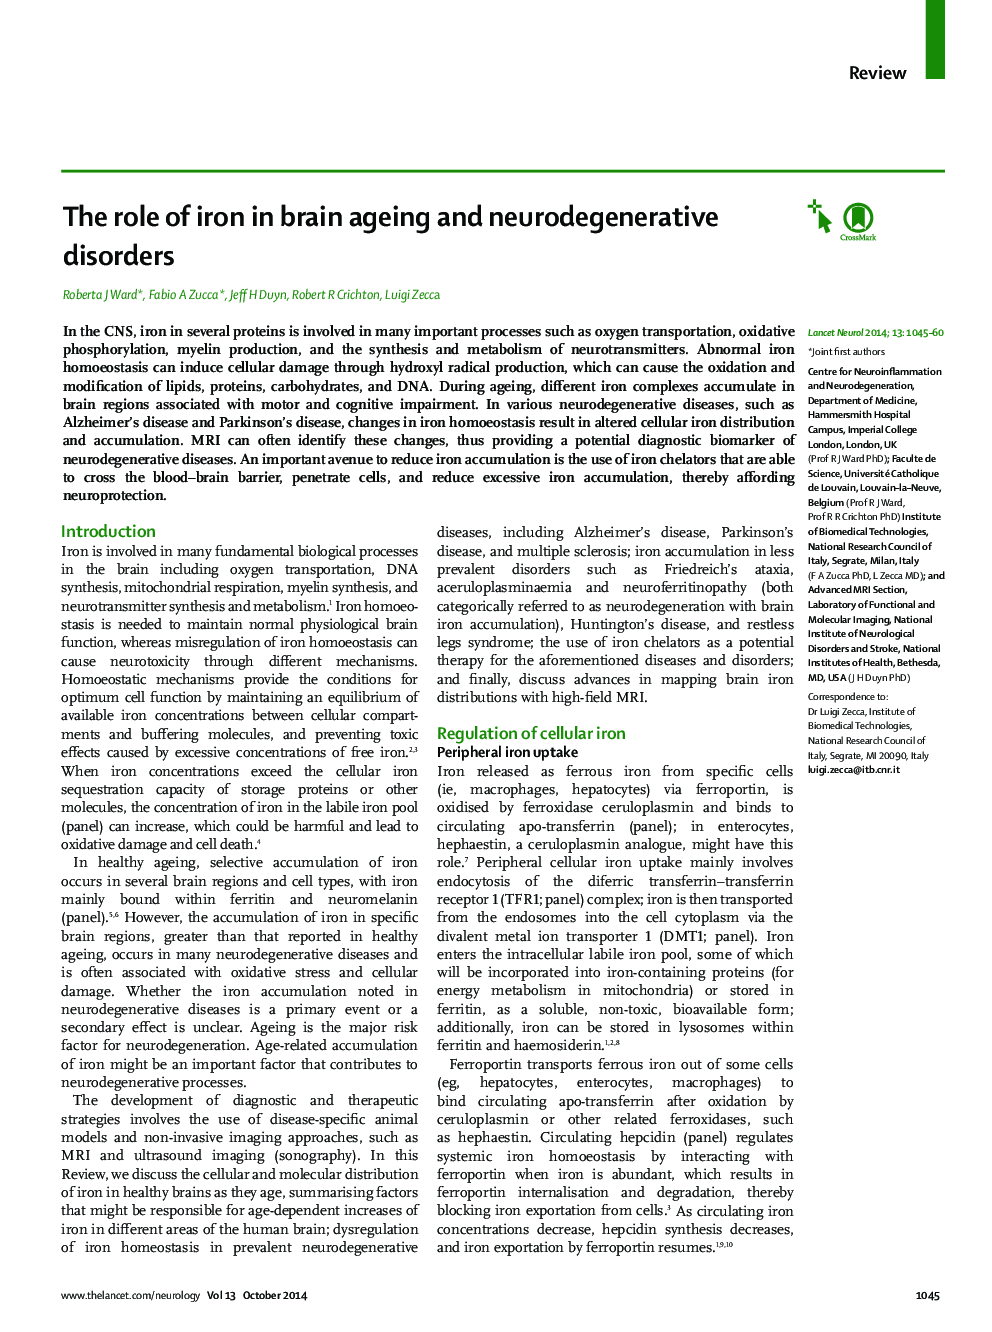 The role of iron in brain ageing and neurodegenerative disorders